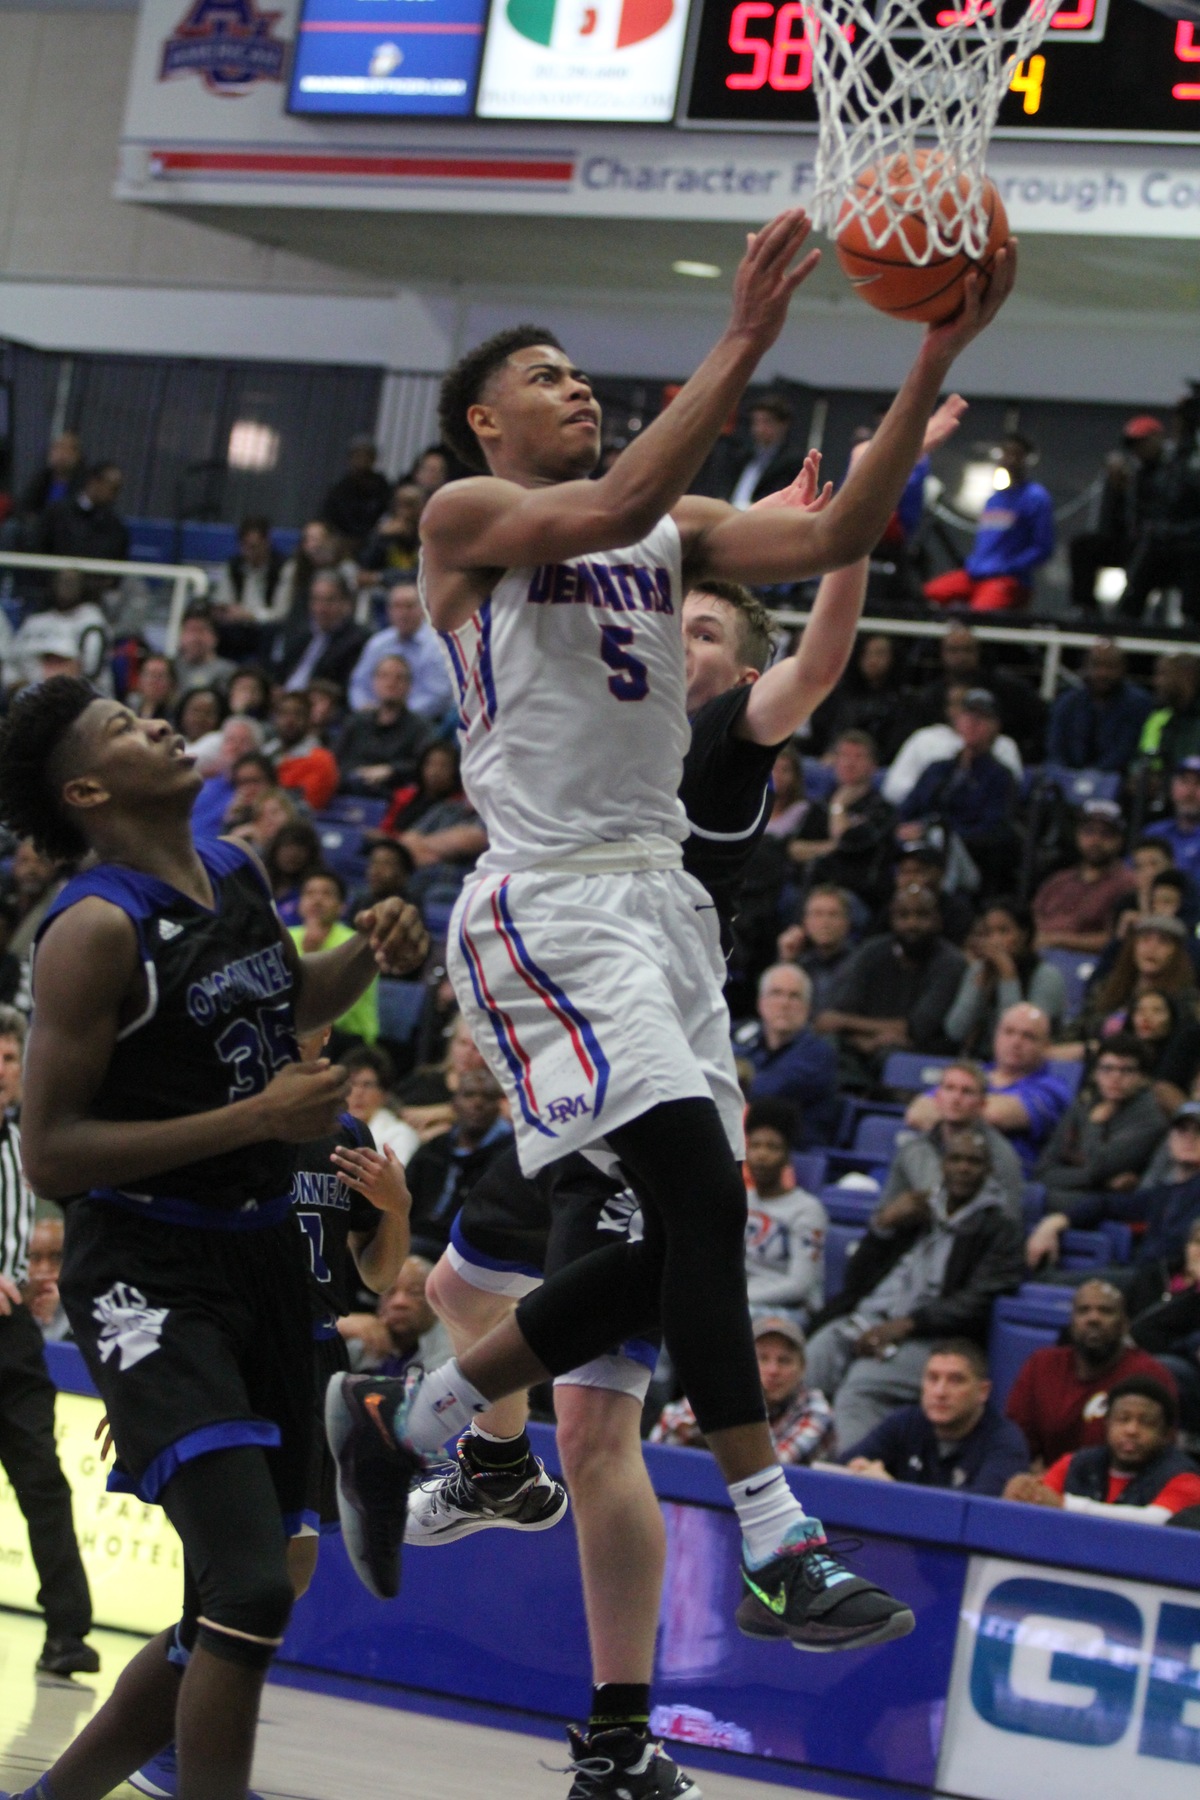 DeMatha Junior Justin Moore's breakout third quarter powers the Stags to the WCAC Championship, where they will face Gonzaga.